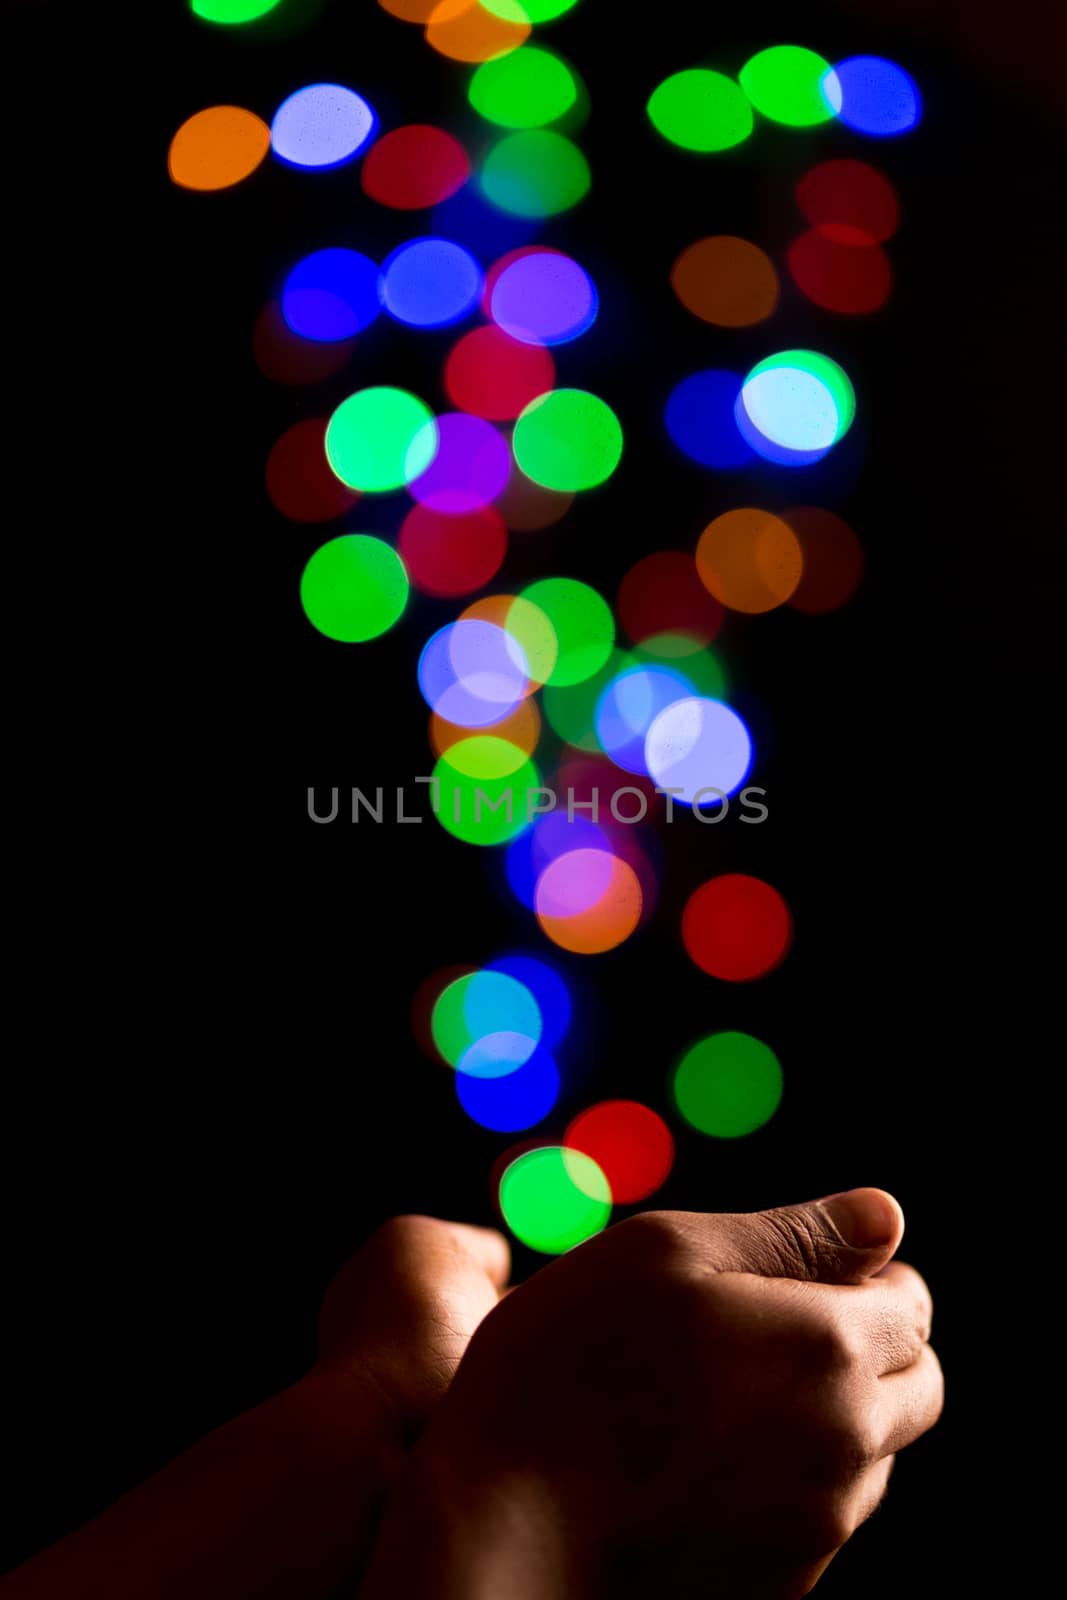 Catching beautiful light bokeh bubbles created by out of focus colorful lights